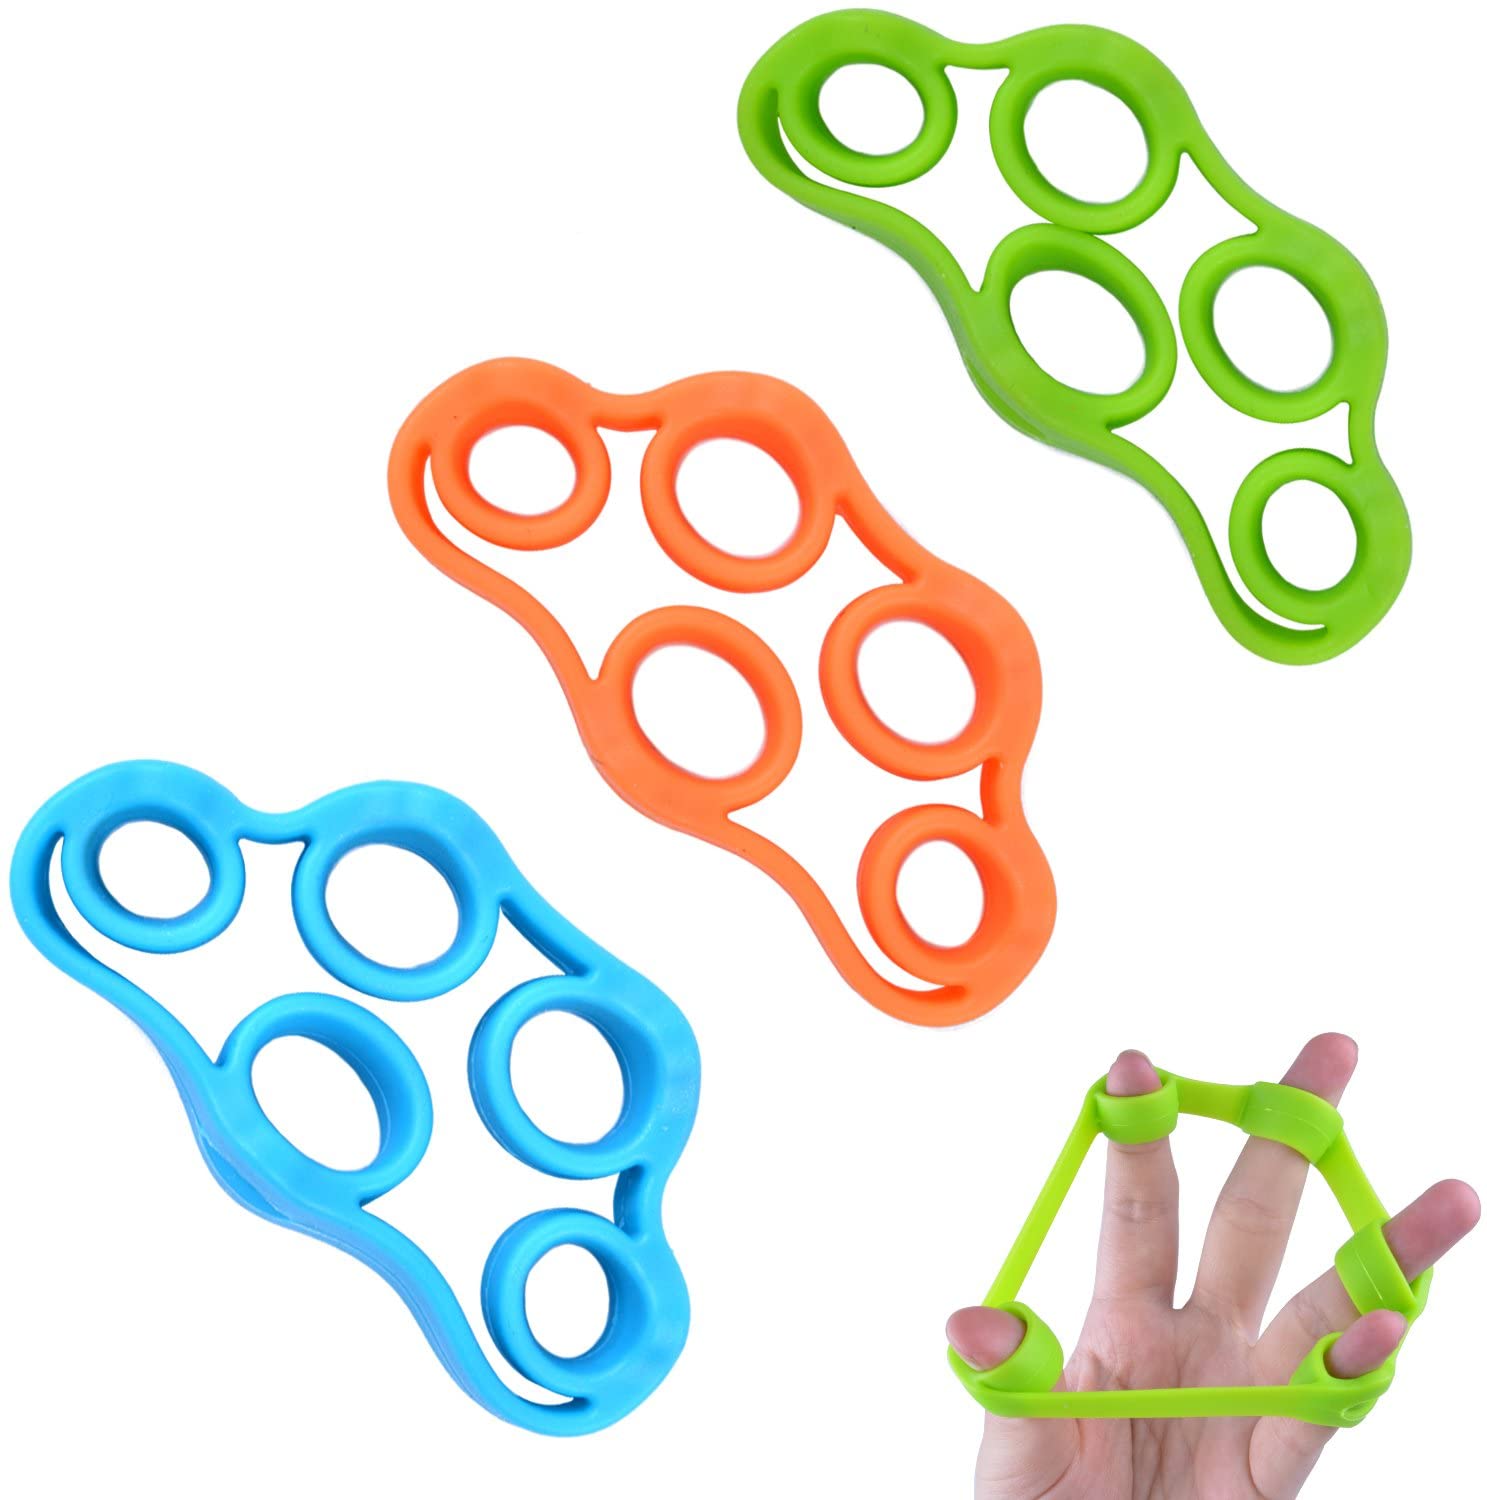 Euhuton 3 Pcs Silicone Finger Stretcher Hand Resistance Bands Hand